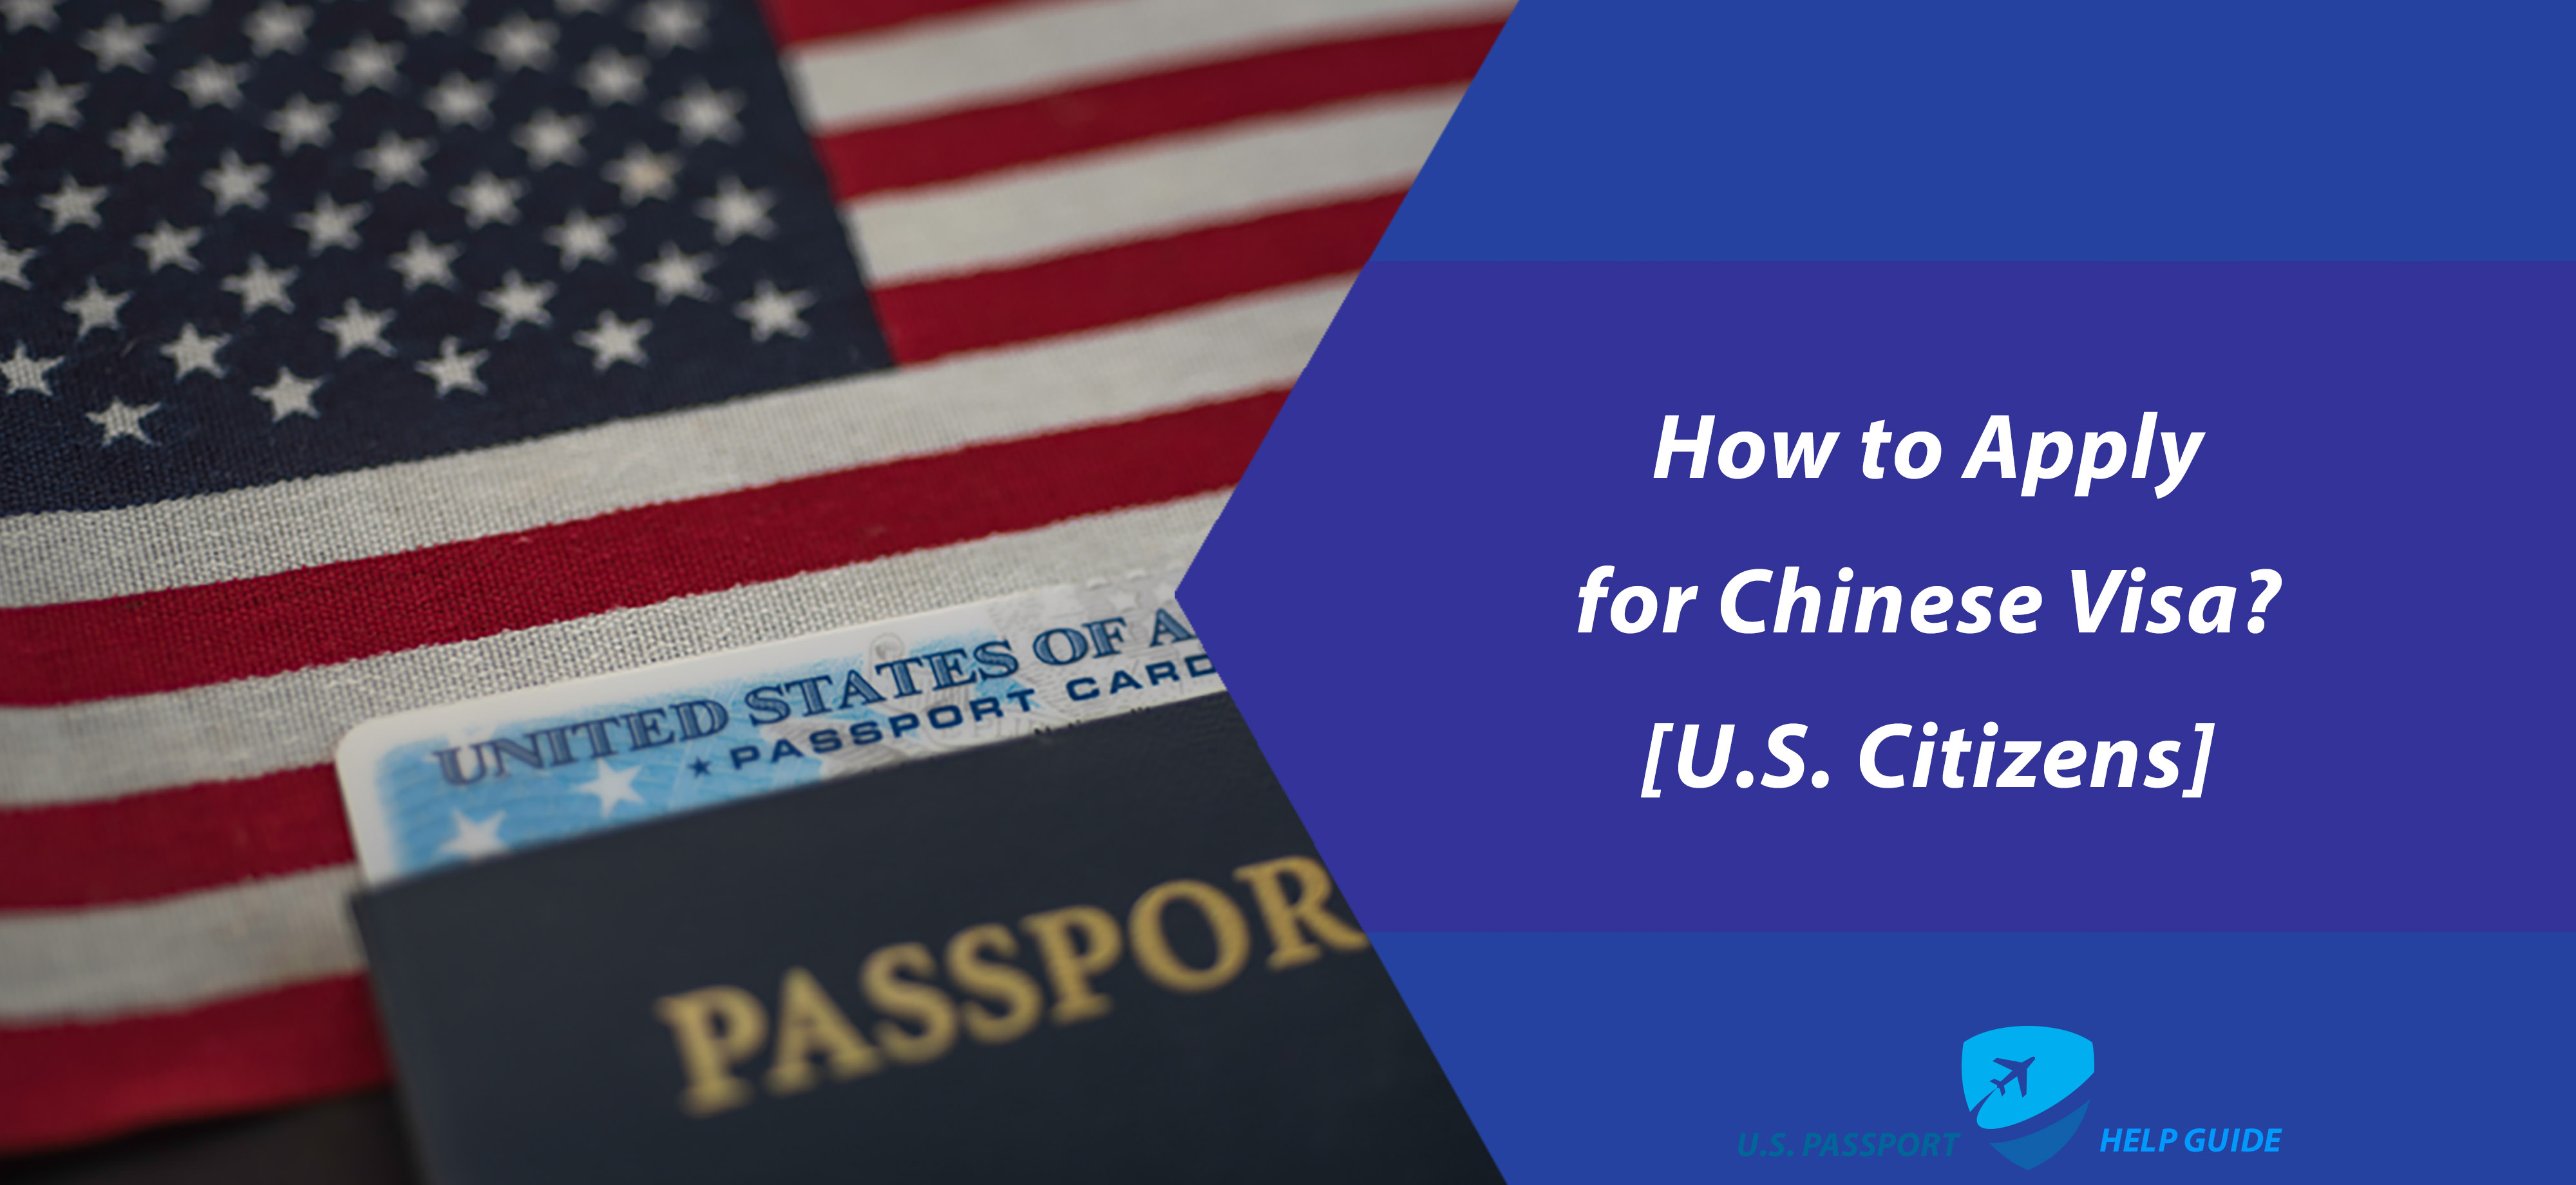 How to Apply for Chinese Visa?